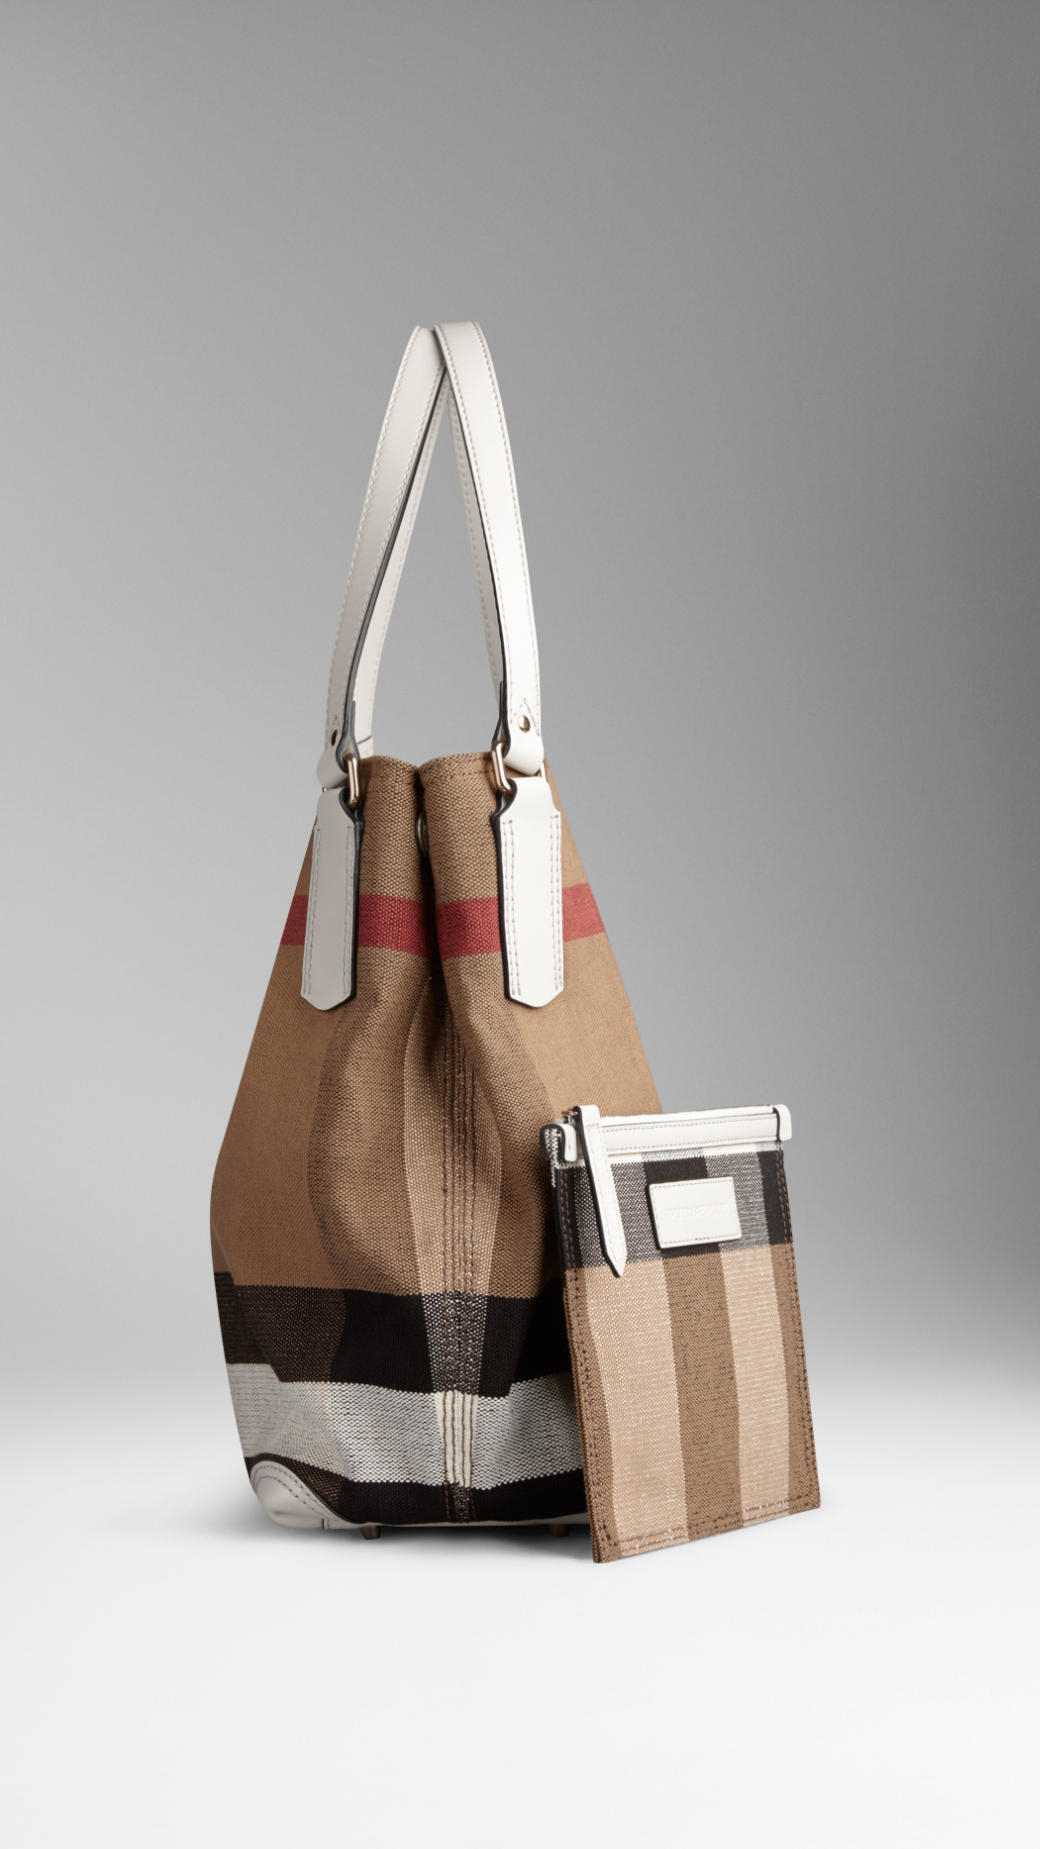 Lyst - Burberry Medium Canvas Check Tote Bag in White